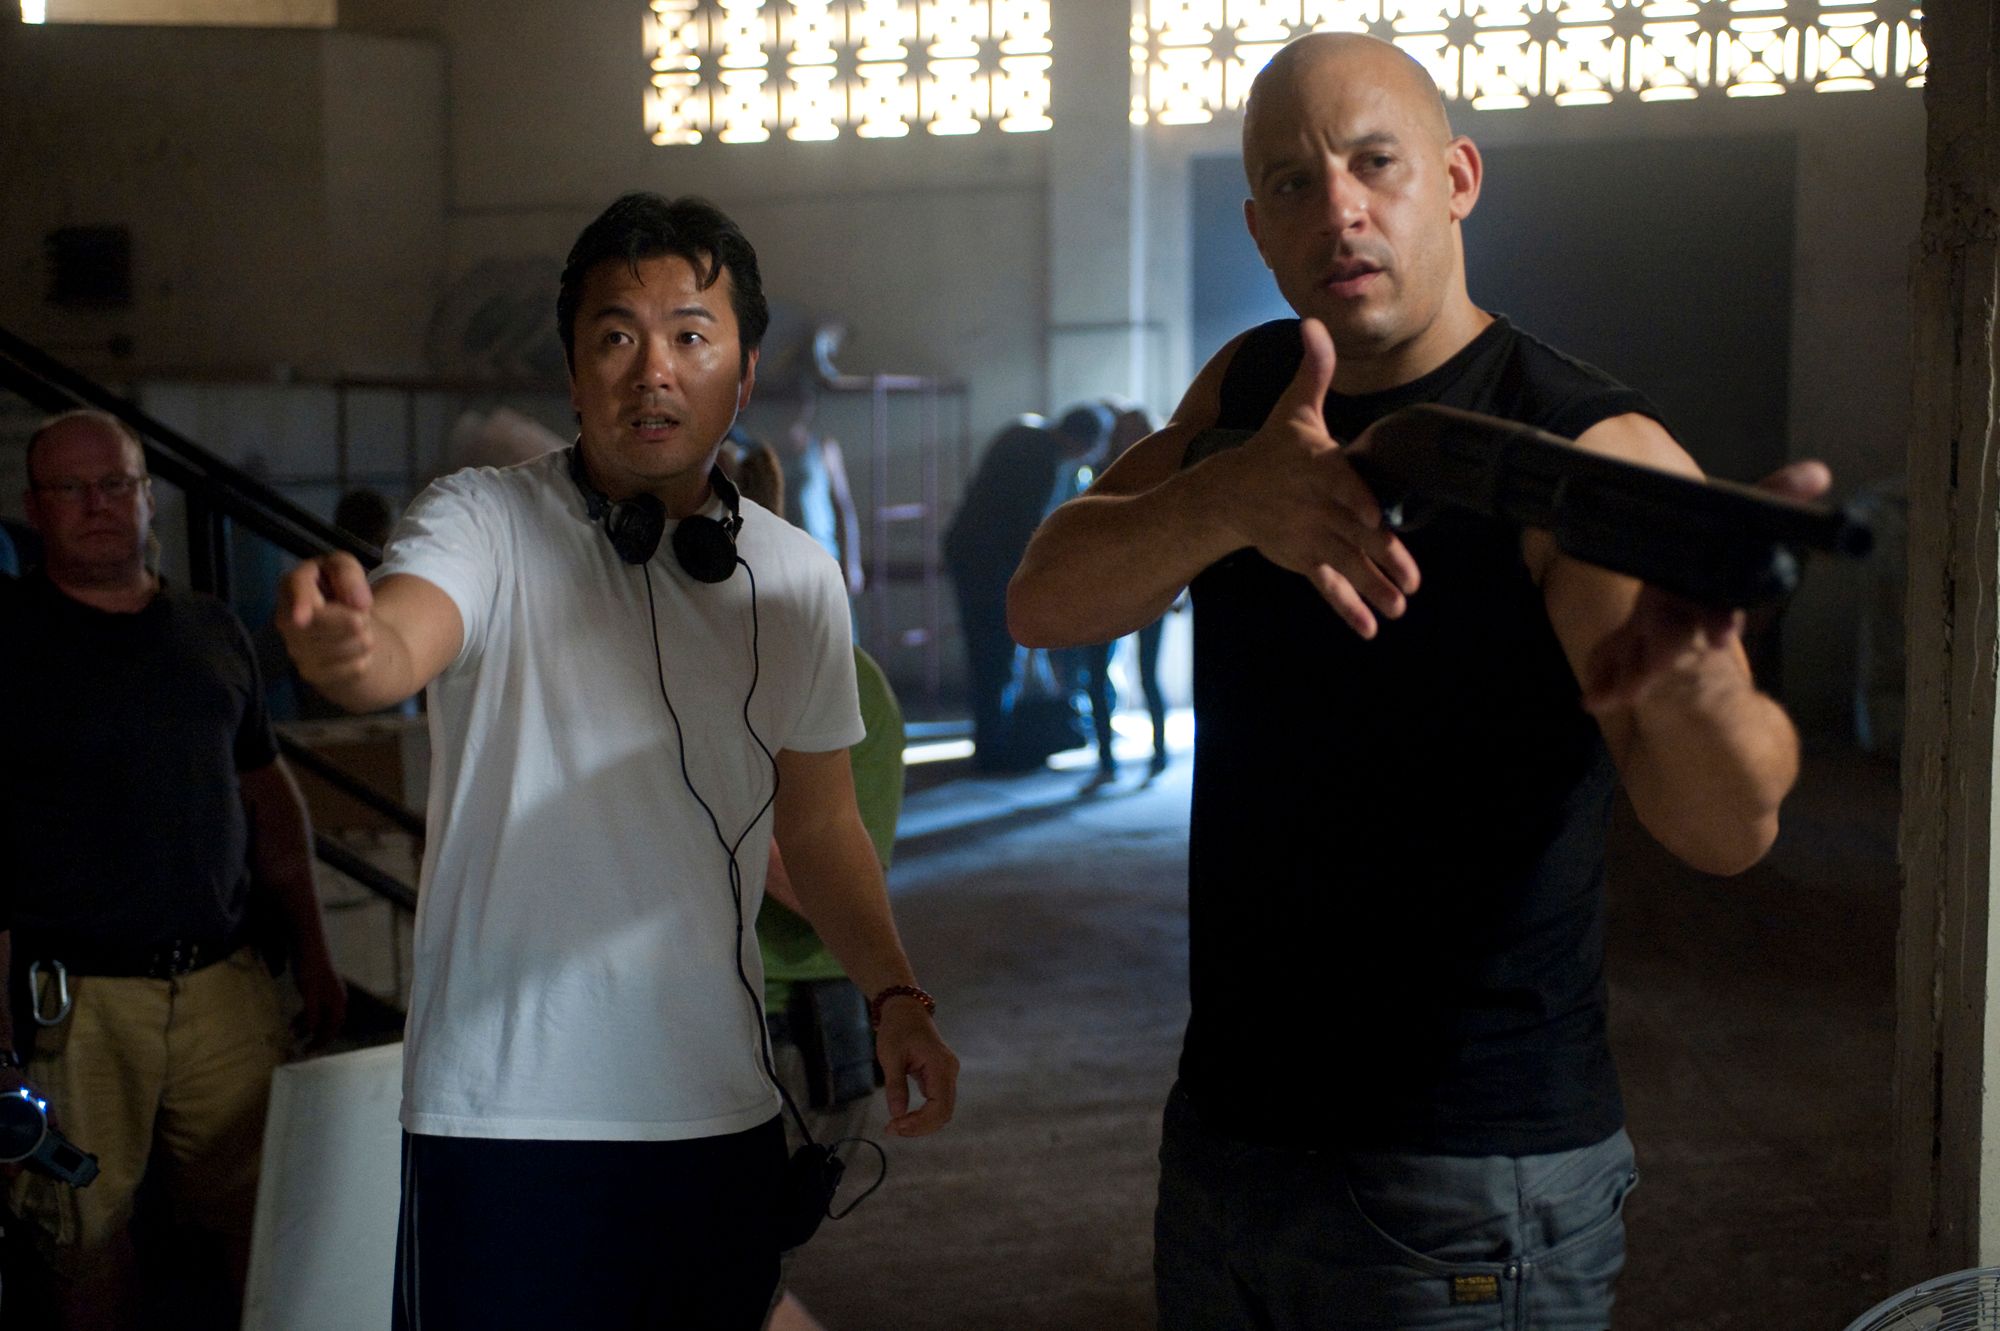 Justin Lin and Vin Diesel on the setLast fall we had the opportunity to travel to Atlanta, Georgia and visit the set of {39}. While we were there we had a chance to look at some of the cars that will be used in the film, watch exclusive footage from the movie and even saw them shooting a scene. We also spoke to several members of the cast and crew including director {40}, picture car coordinator {41}, and actors {42}, {43}, {44}, {45}, {46}, {47}, {48}, {49}, {50}, and {51}.